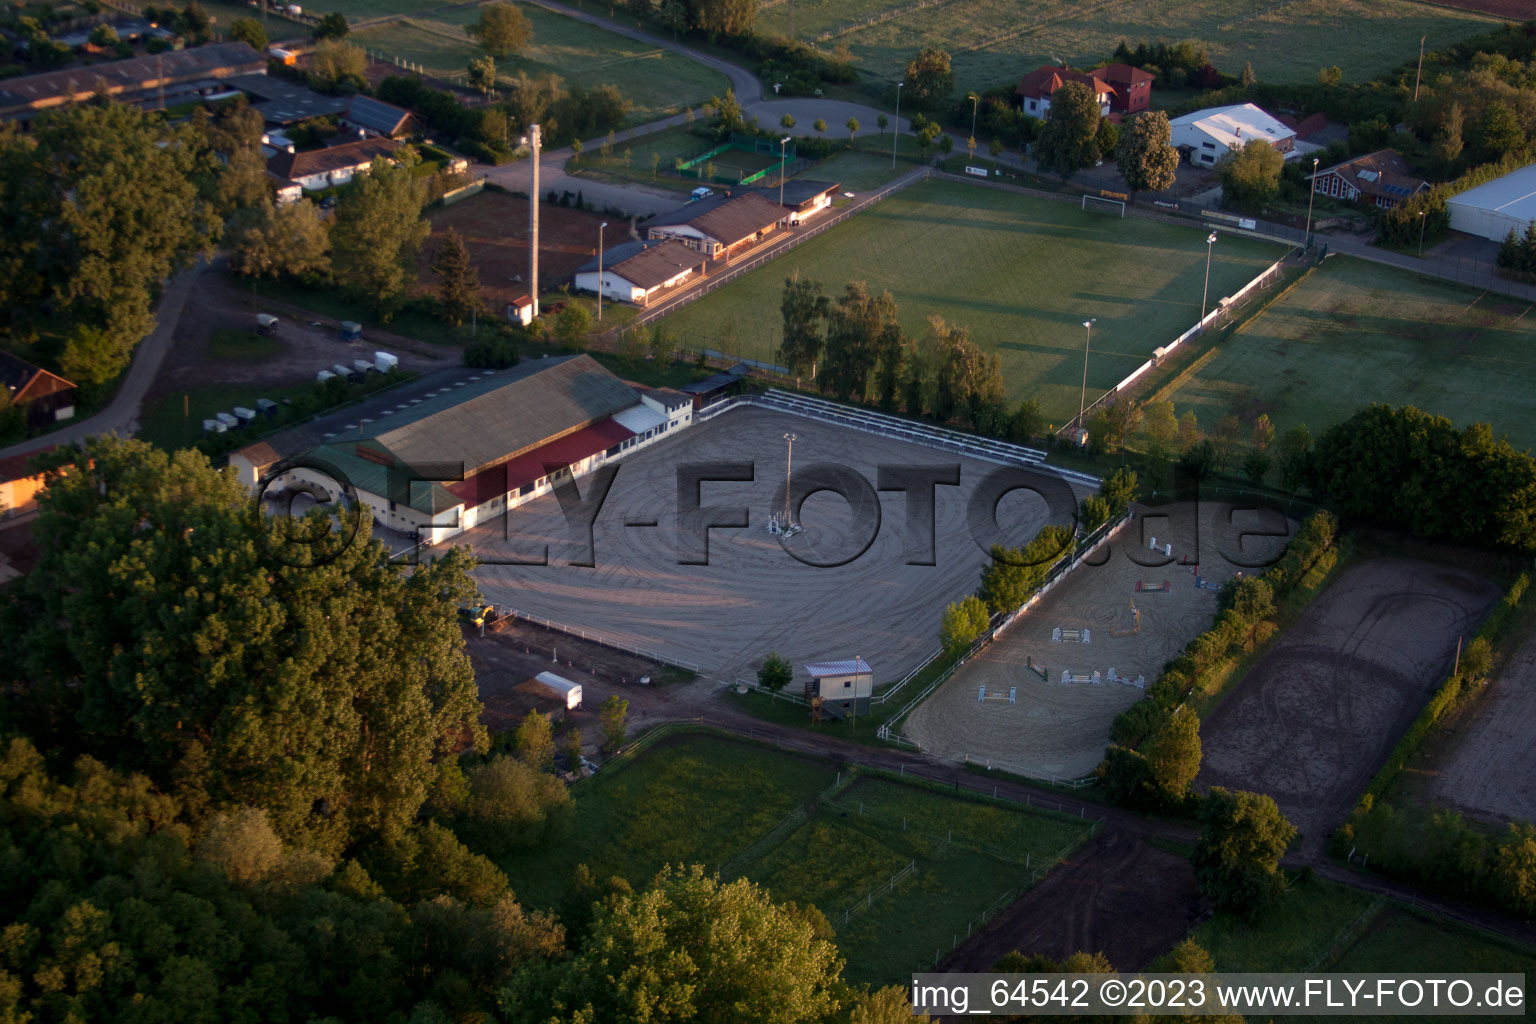 Billigheim-Ingenheim in the state Rhineland-Palatinate, Germany from the drone perspective